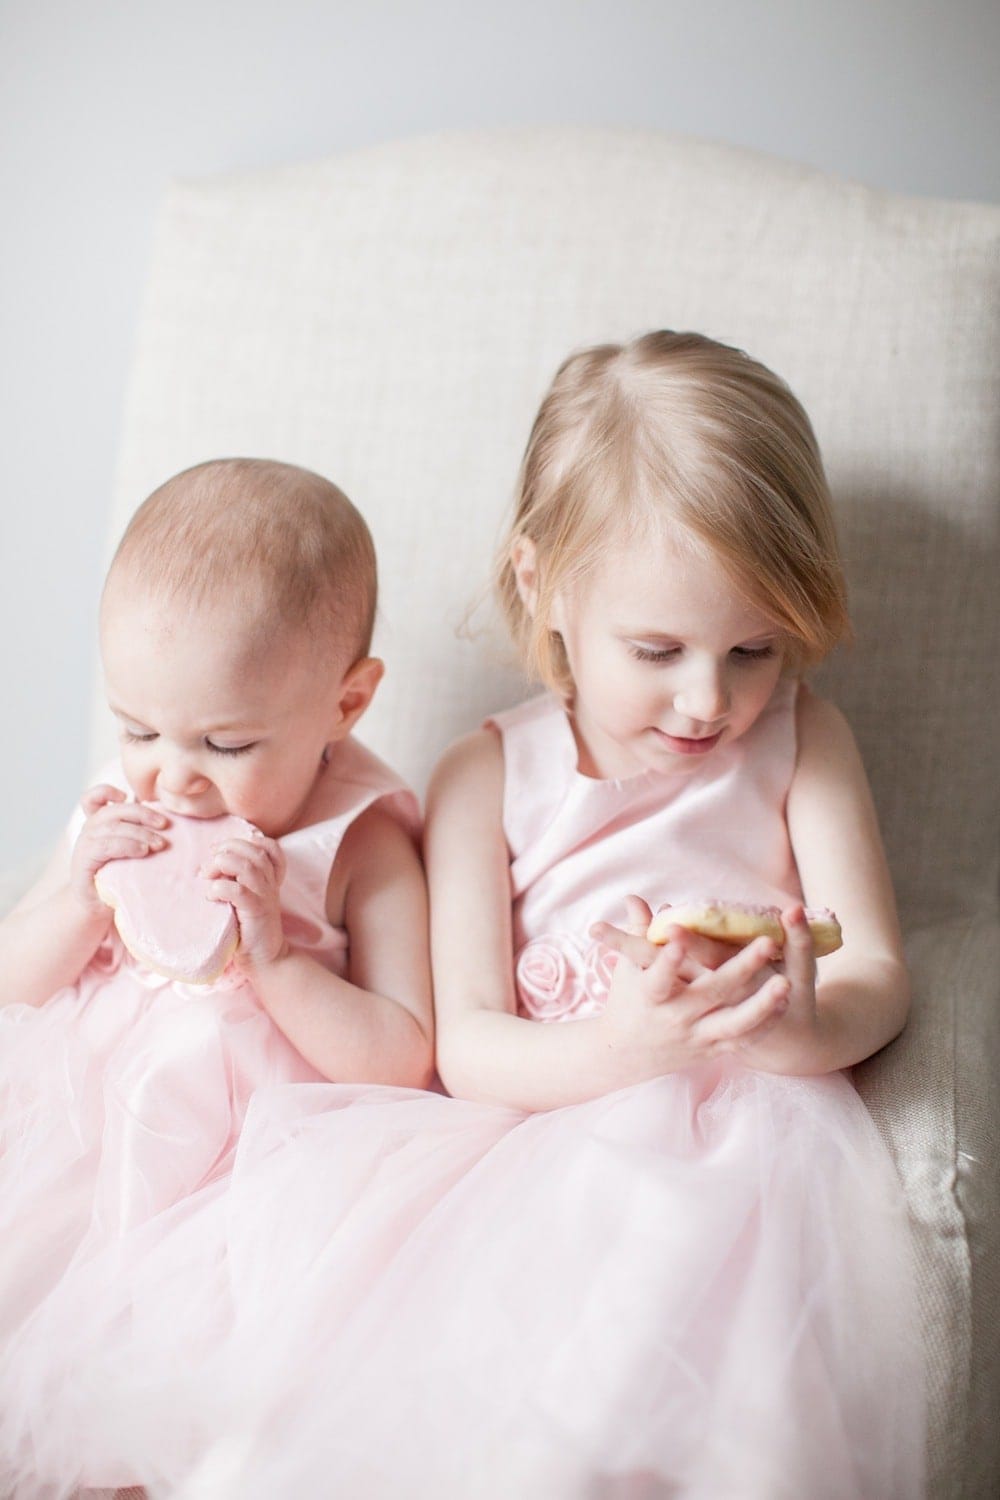 Two little girls wearing matching dresses sitting next to each other.